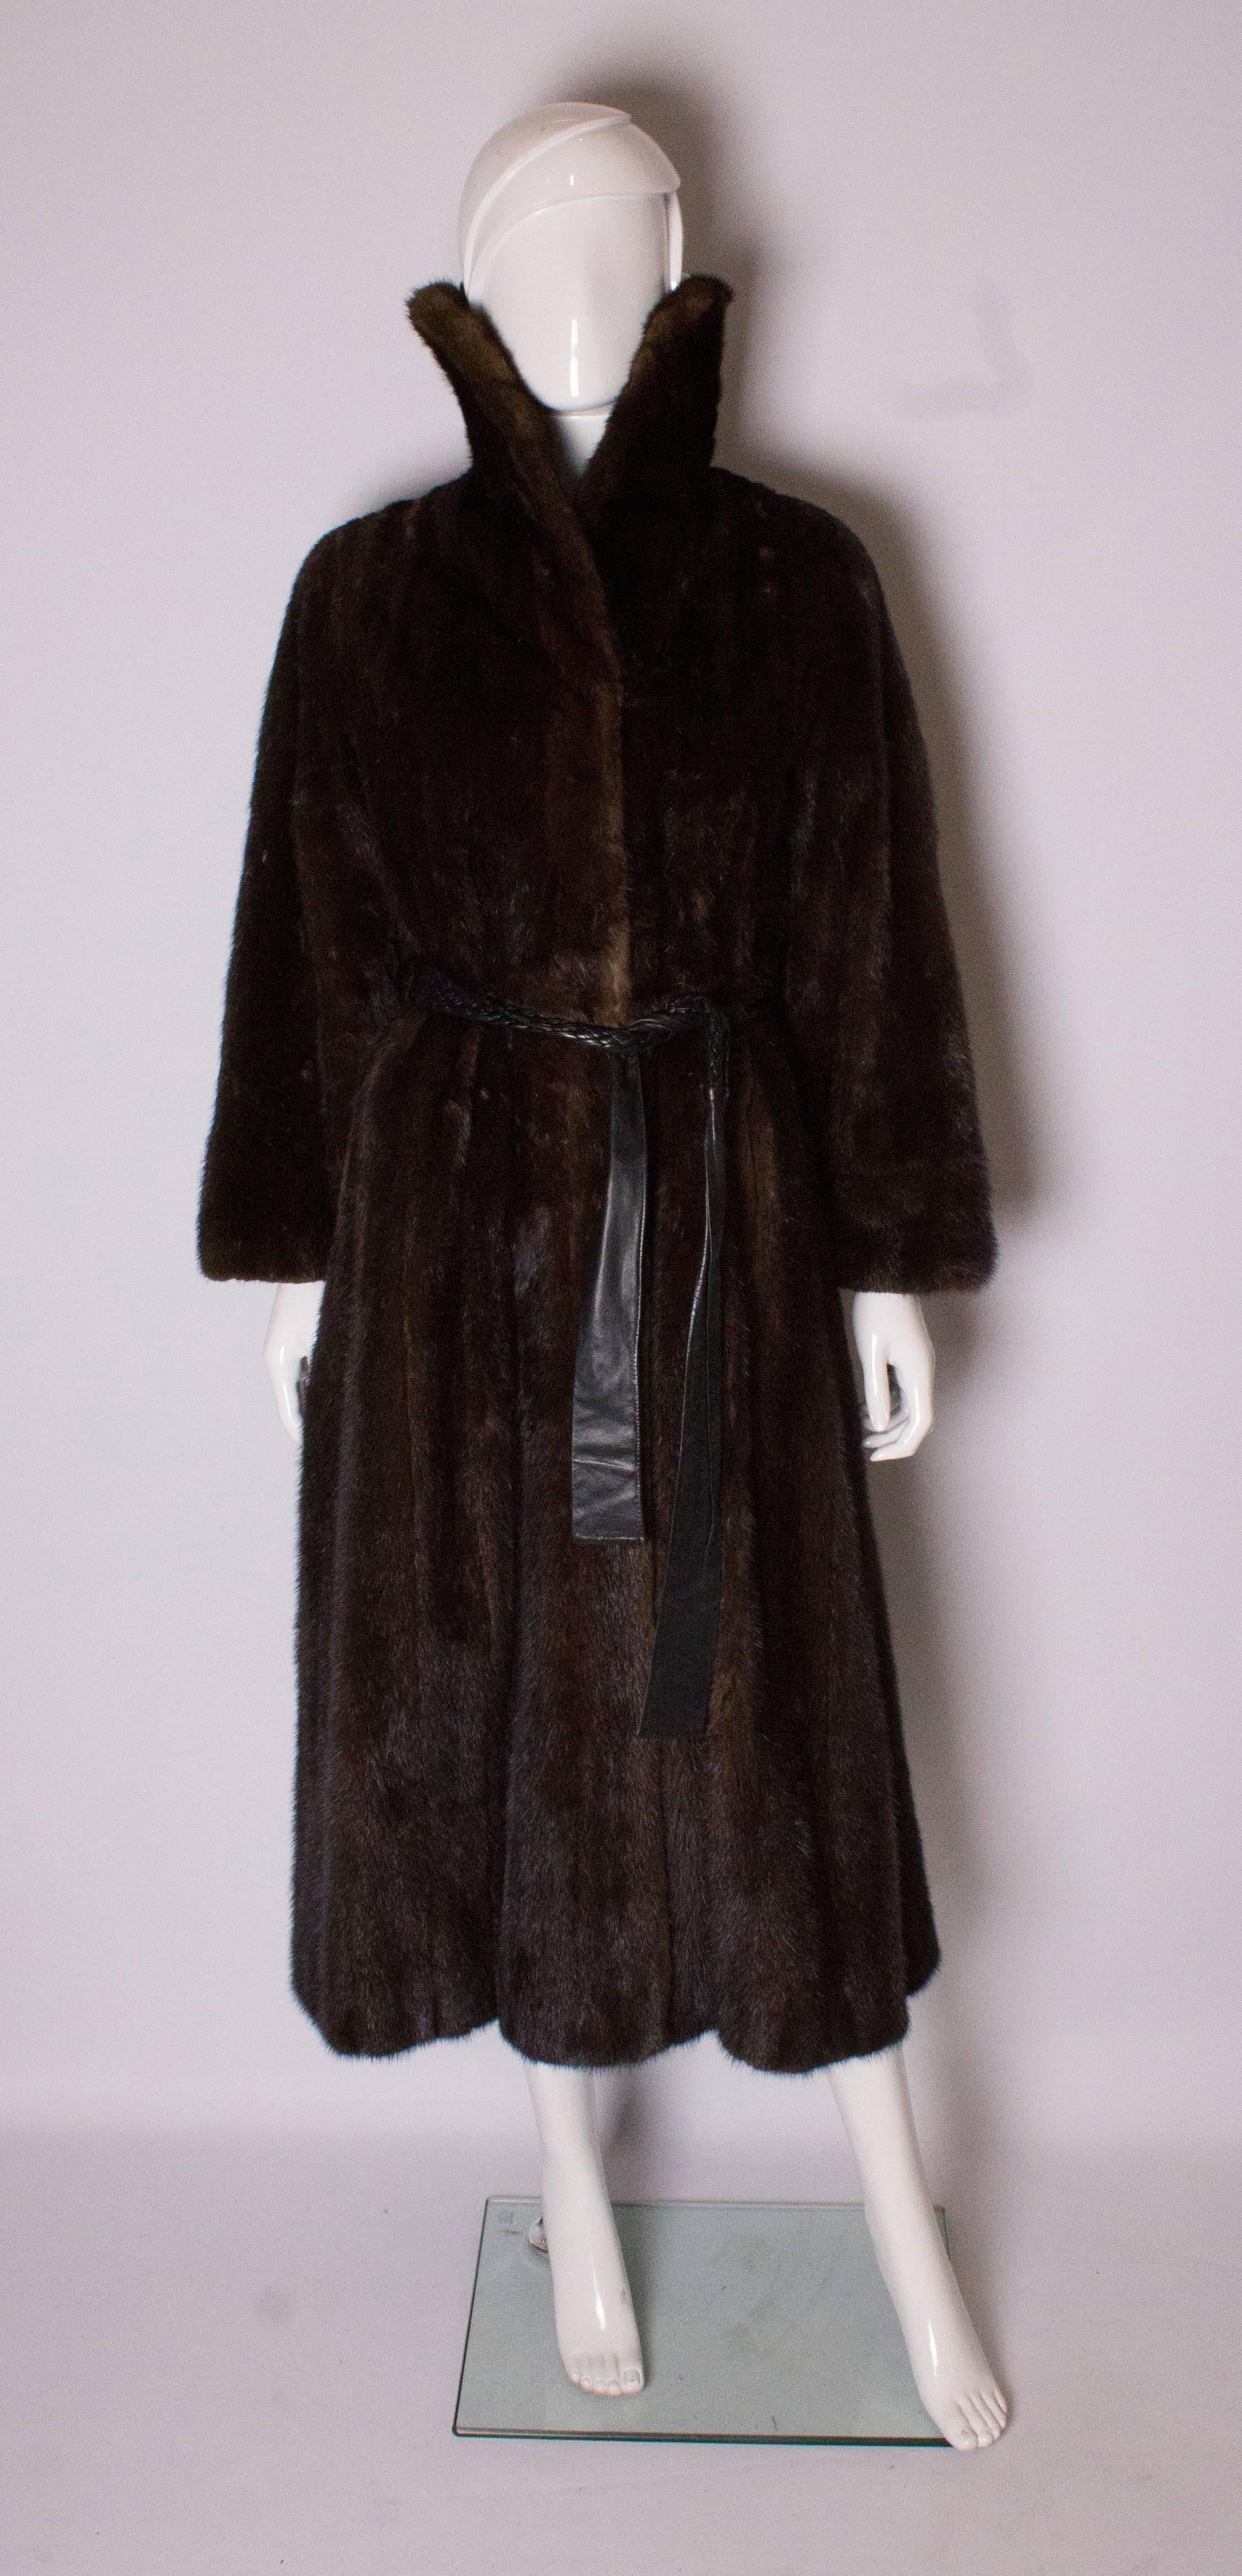 A glamorous vintage  mink coat with shawl collar and wrap over front. The coat has wide sleeves and a brown plaited leather belt ( coat has belt holes) that gives it definition, and an adjustable waist.